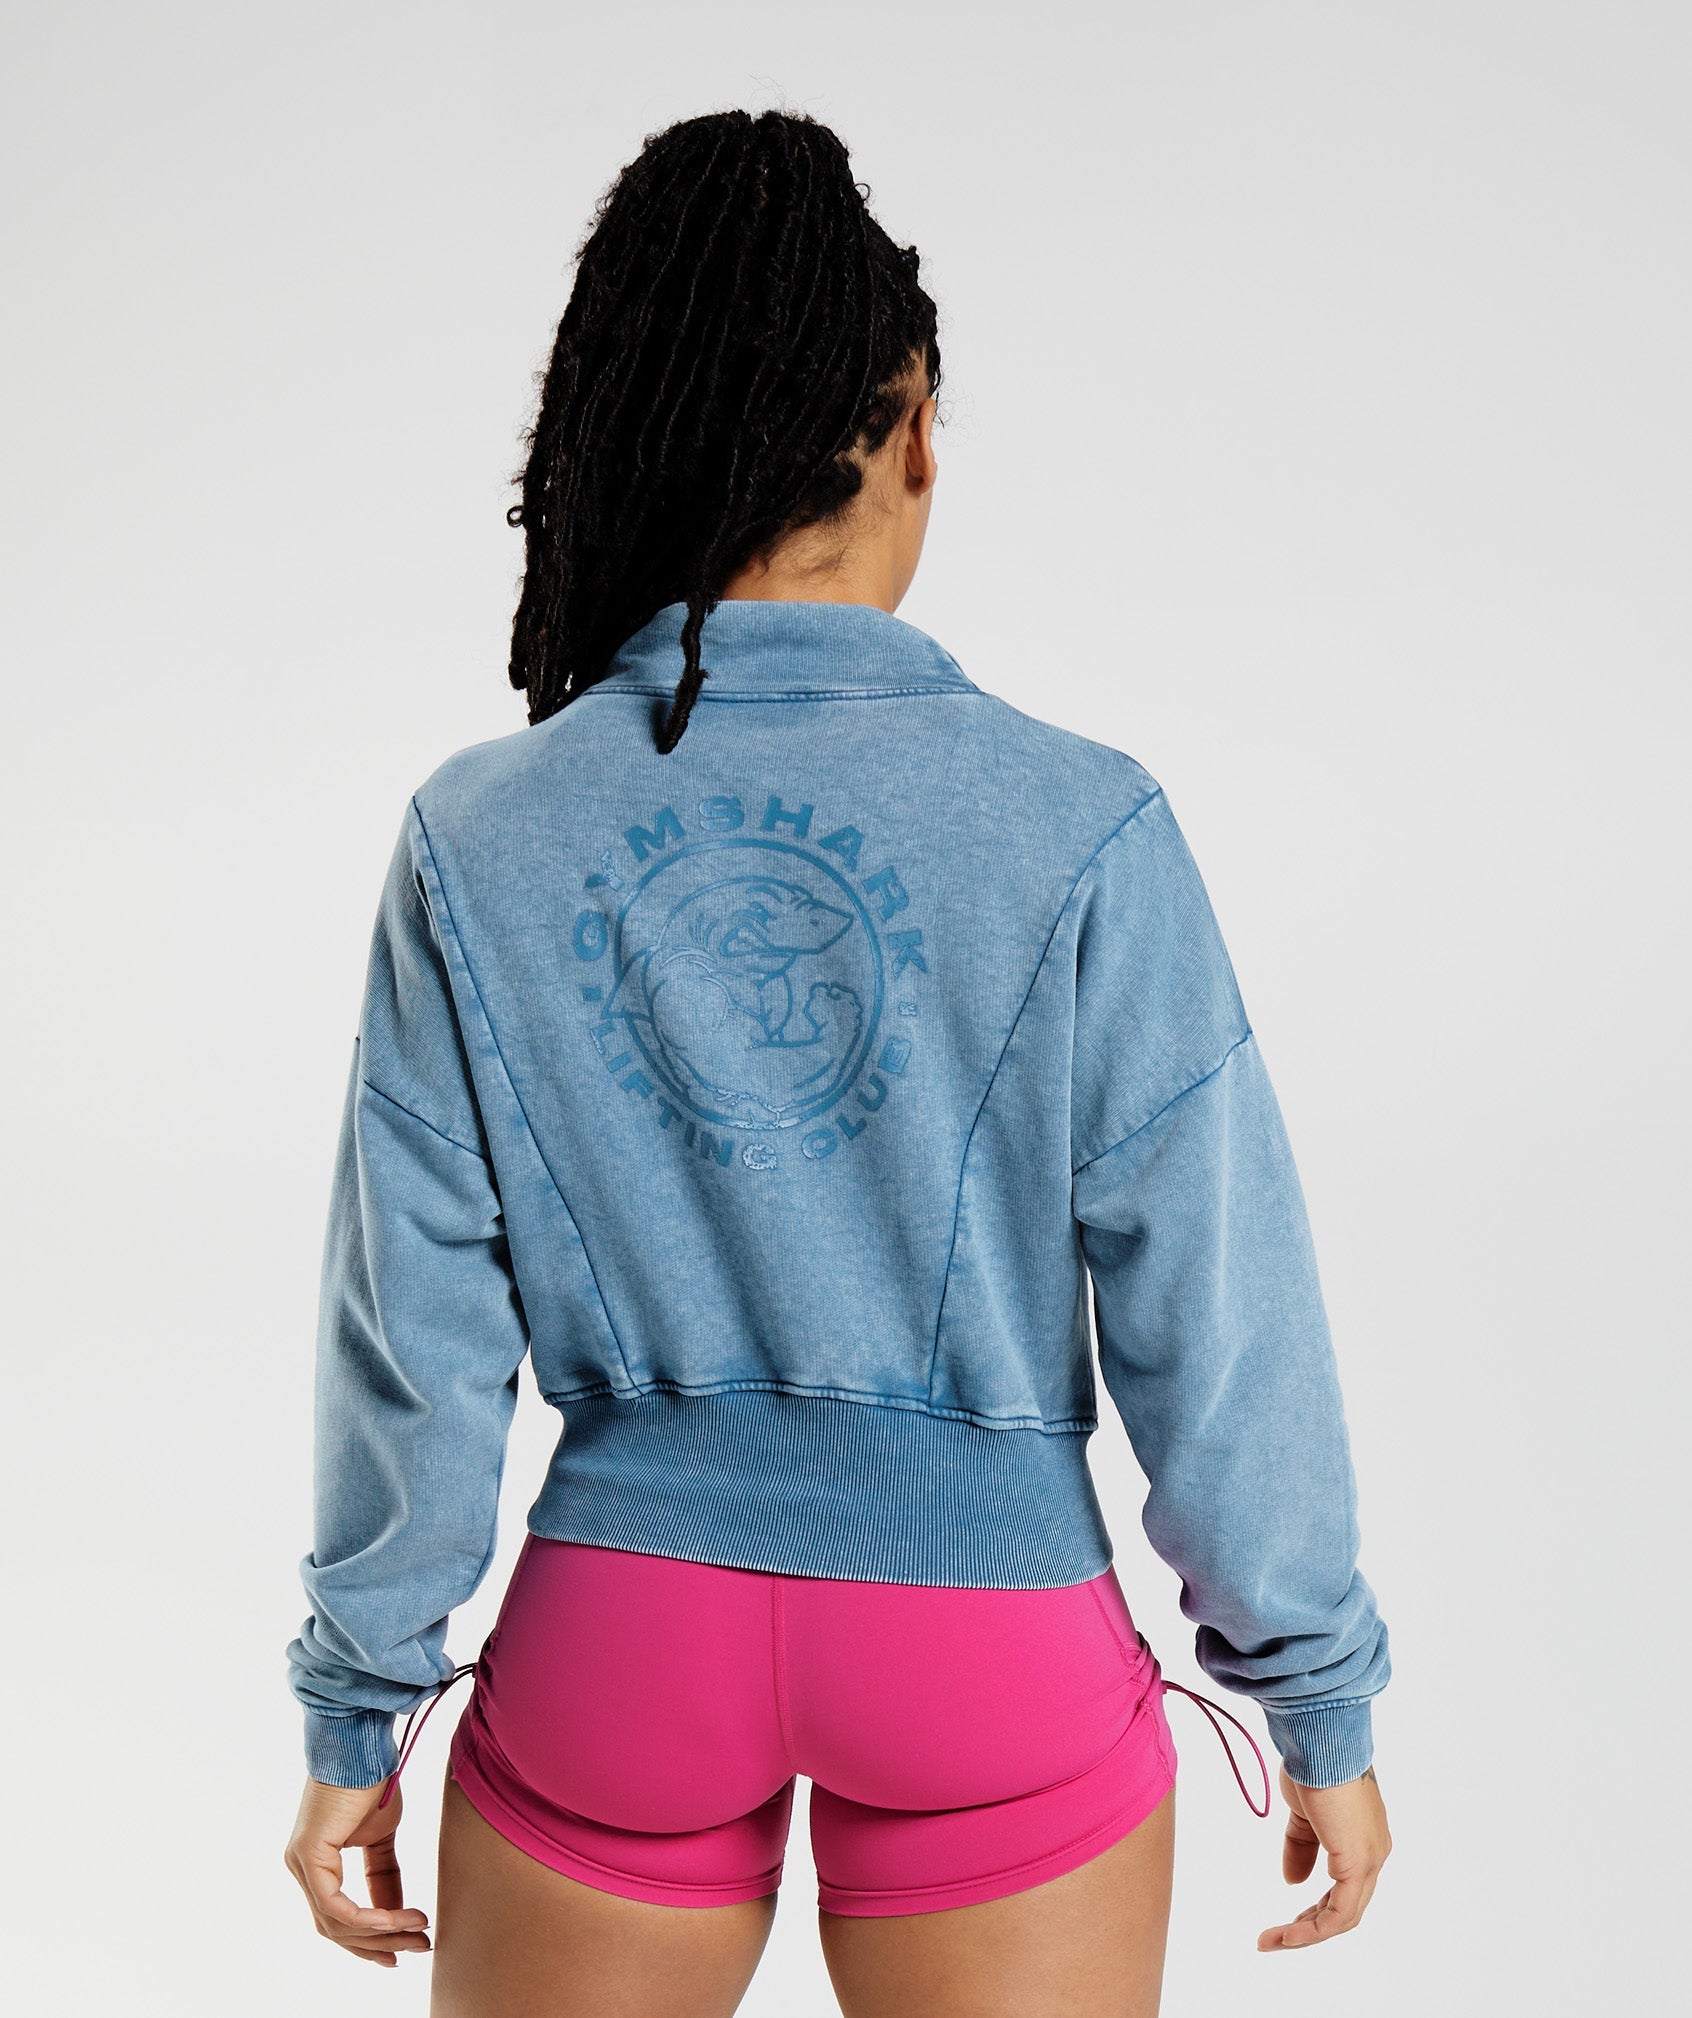 Legacy Washed Sweatshirt in Lakeside Blue - view 2